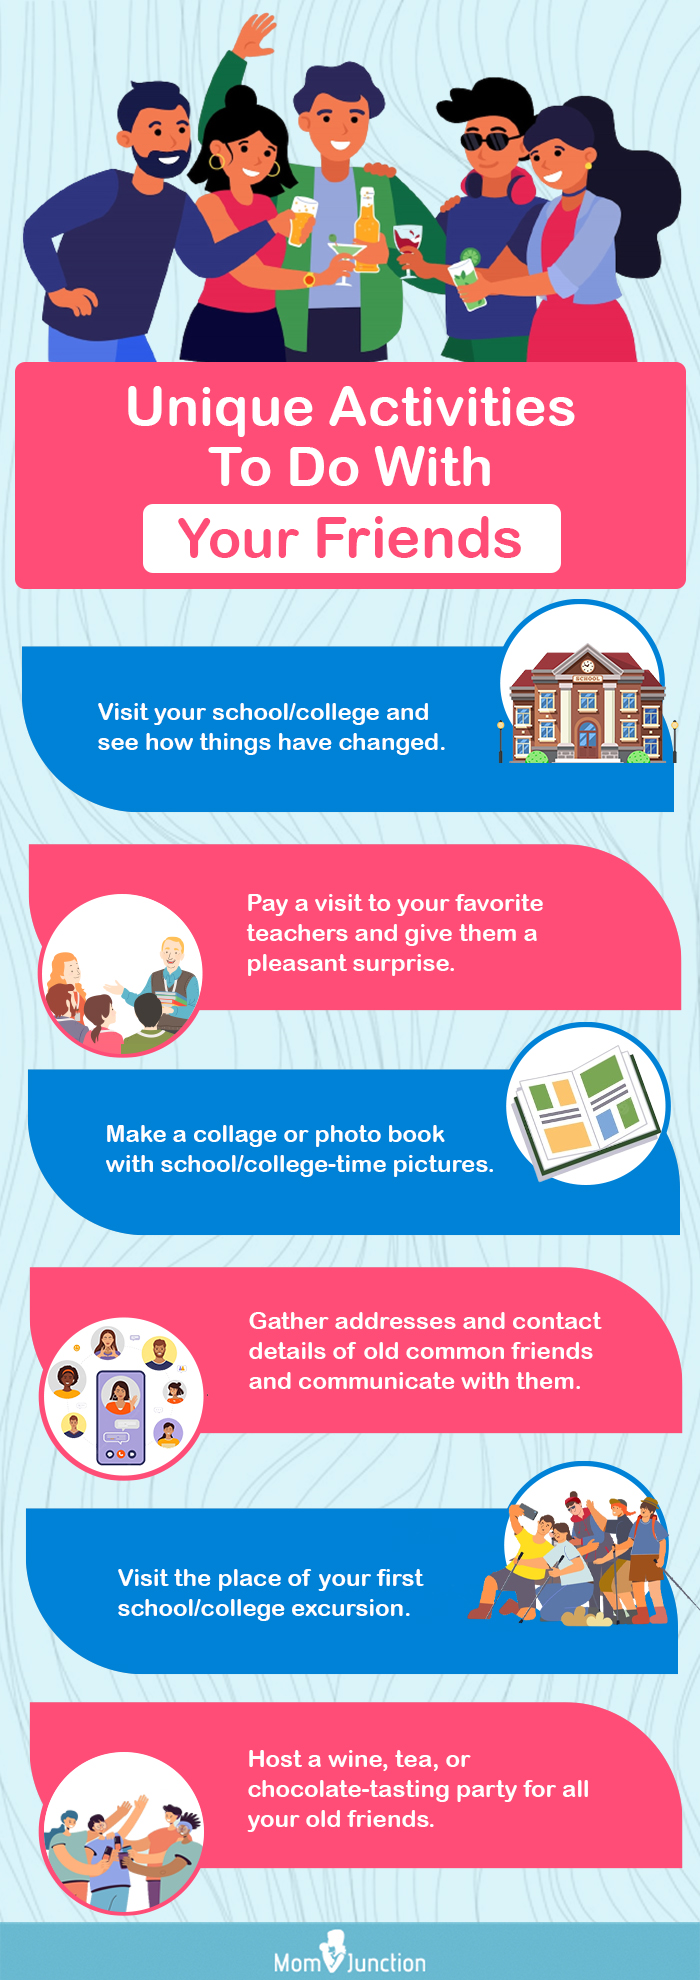 unique ways to spend time with your friends [infographic]